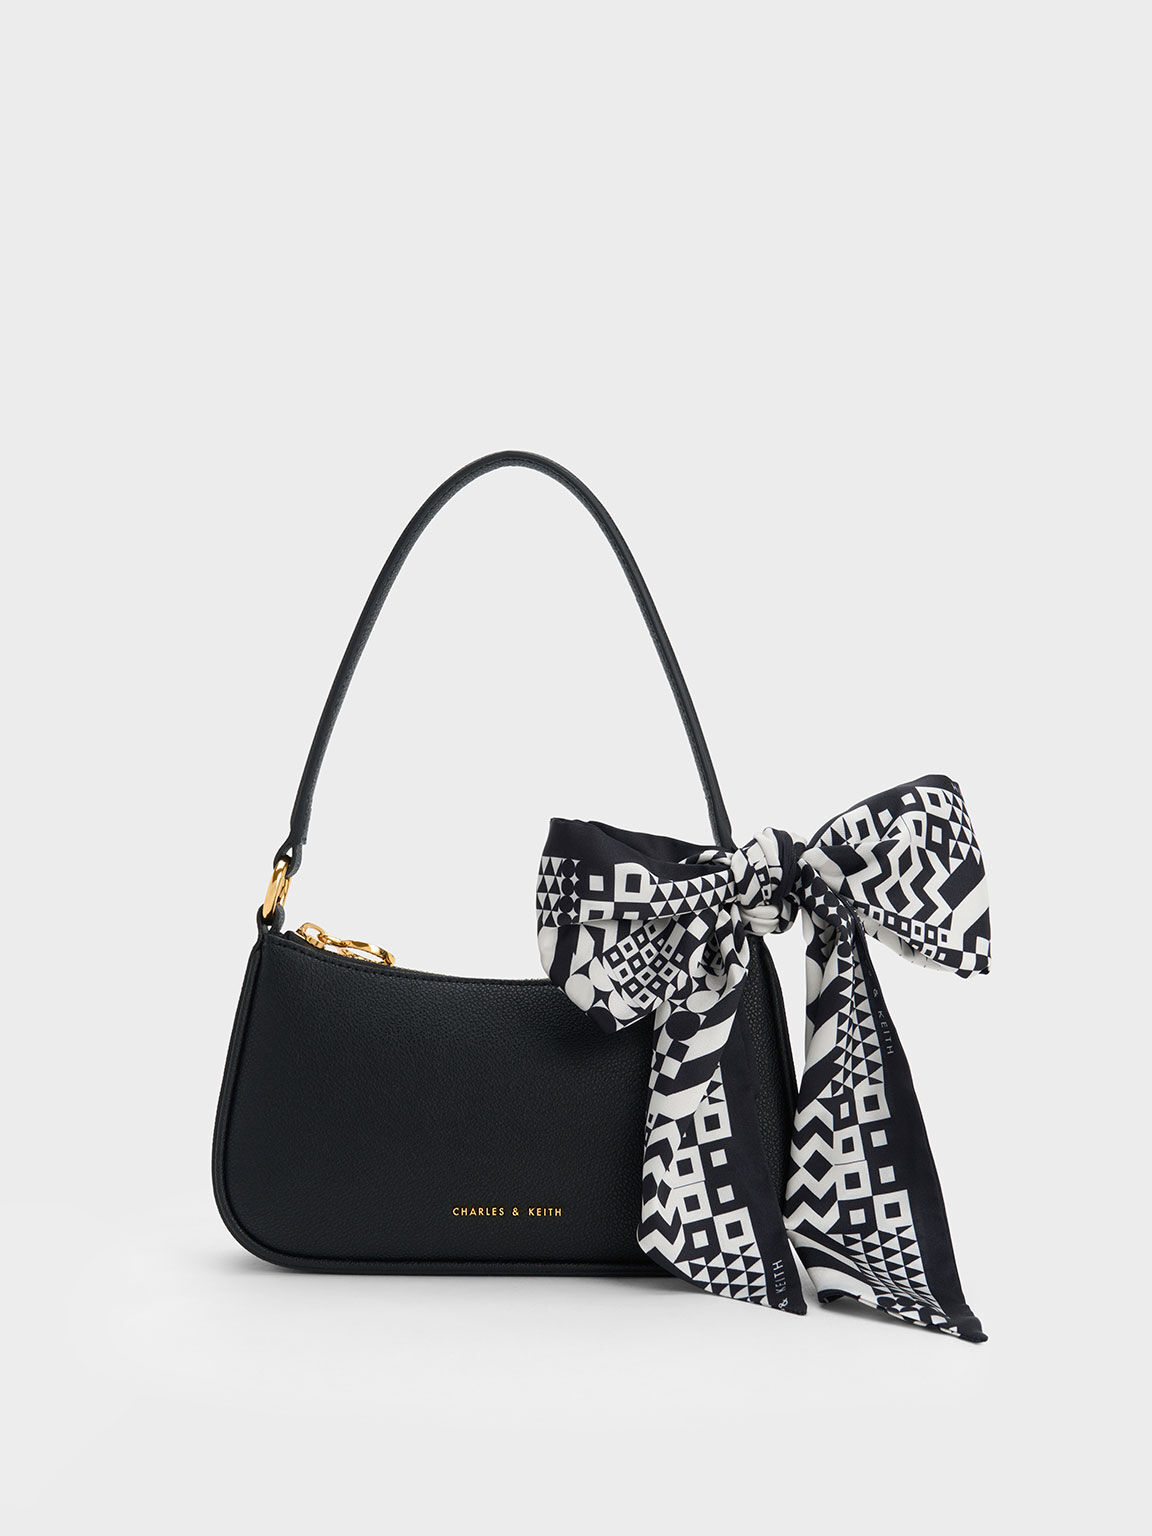 Charles & Keith Sling Shoulder Bags for Women